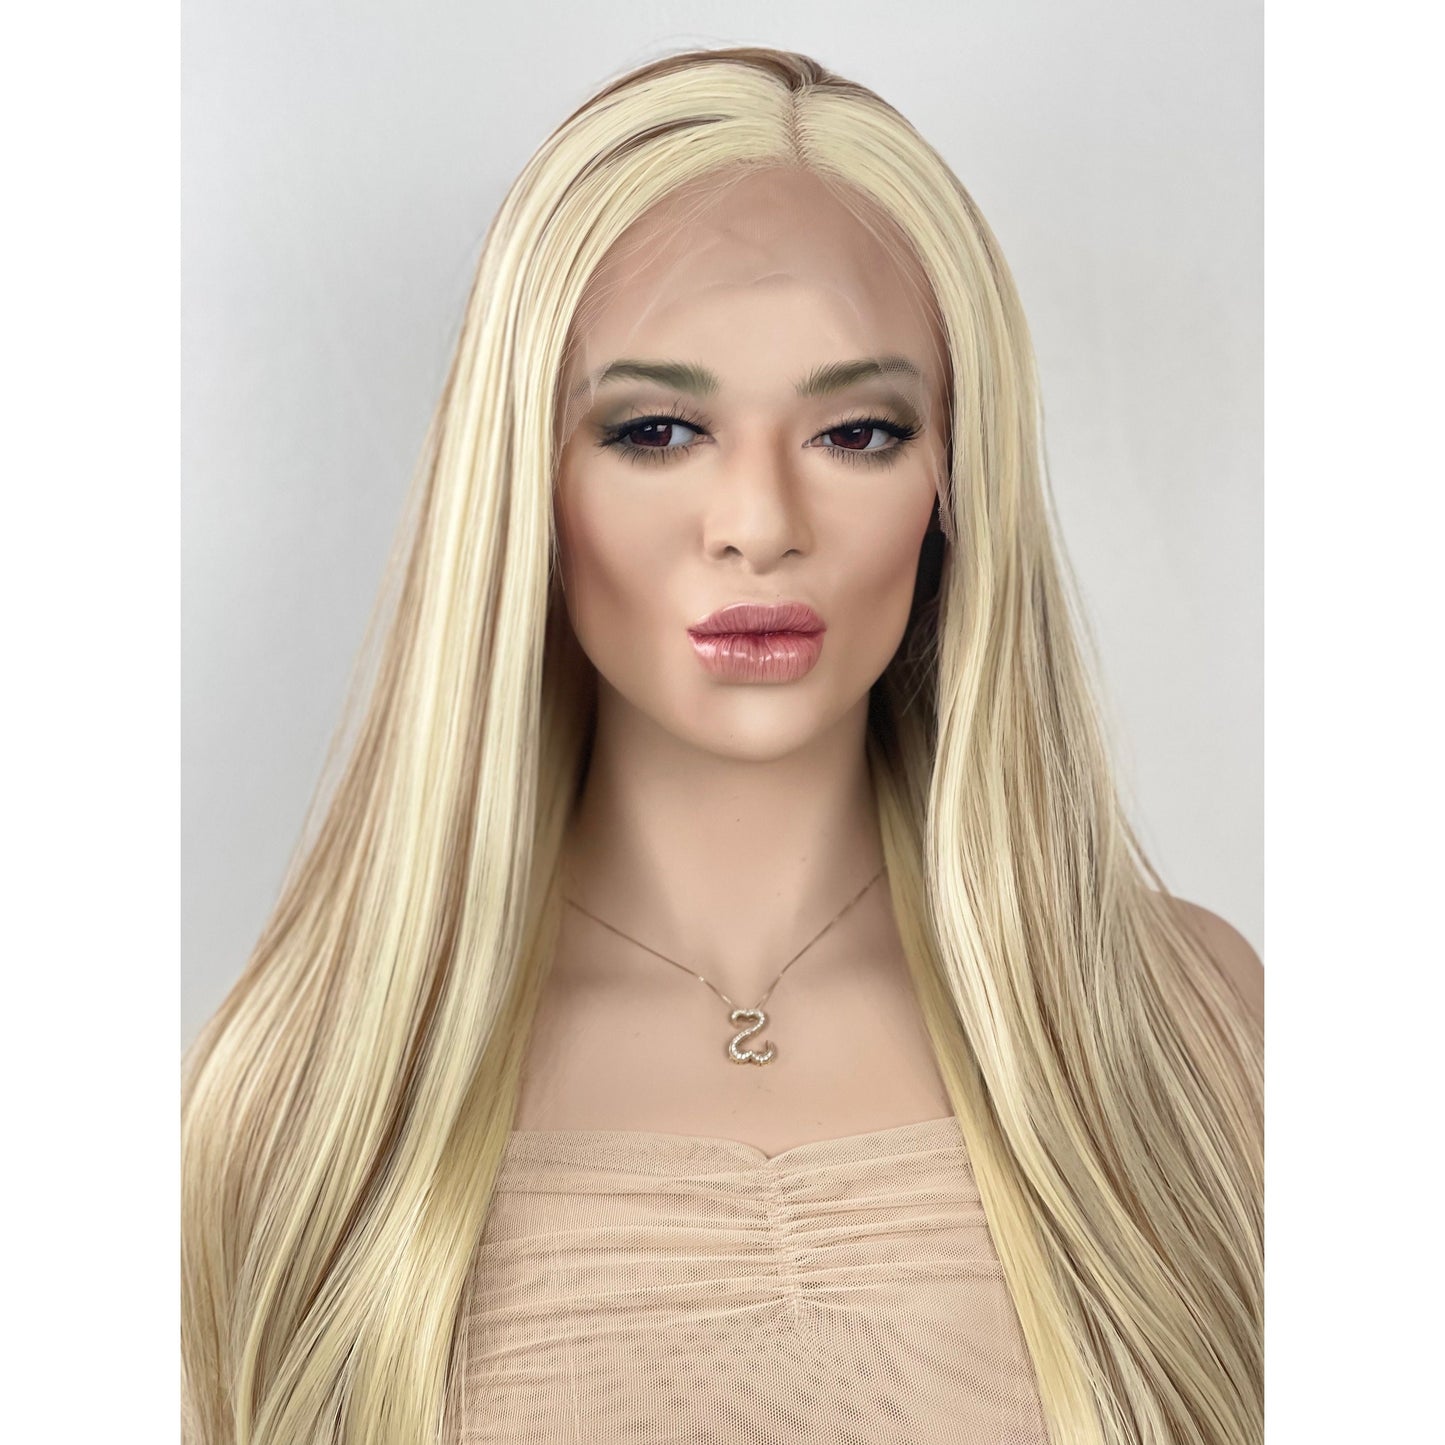 24” Blonde Light Brown Mixed Highlights Wig Human Hair Blend Lace Front Wig 13x2” Free Parting Long Straight Hair Multi-Directional Wig